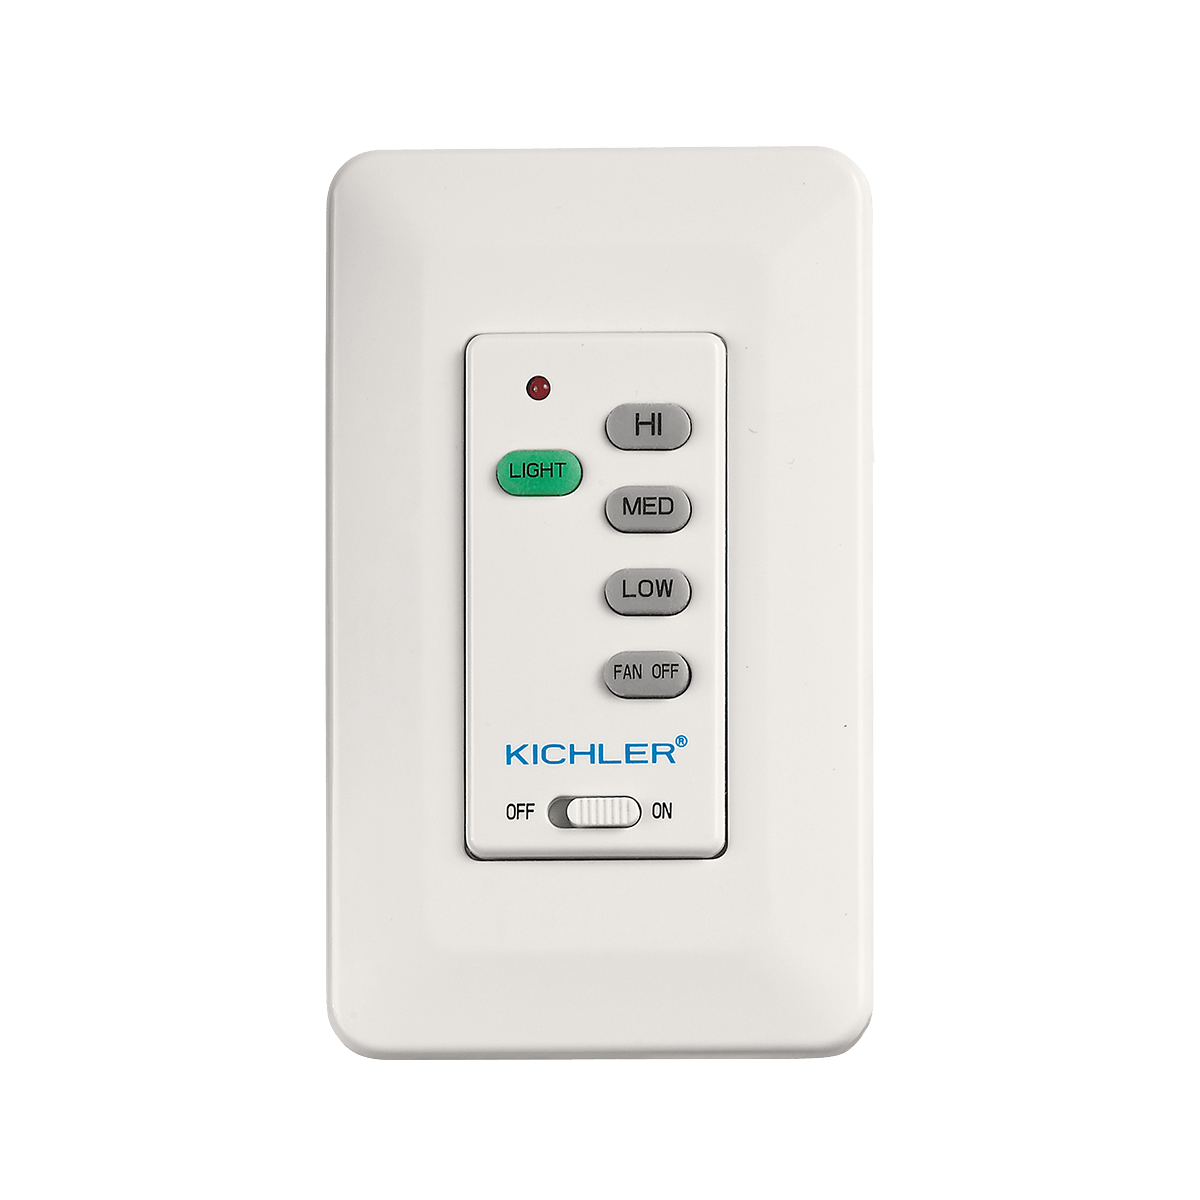 This wall-mounted control for Kichler ceiling fans allows you to choose from different fan speeds, operate the light and turn the fan on or off.